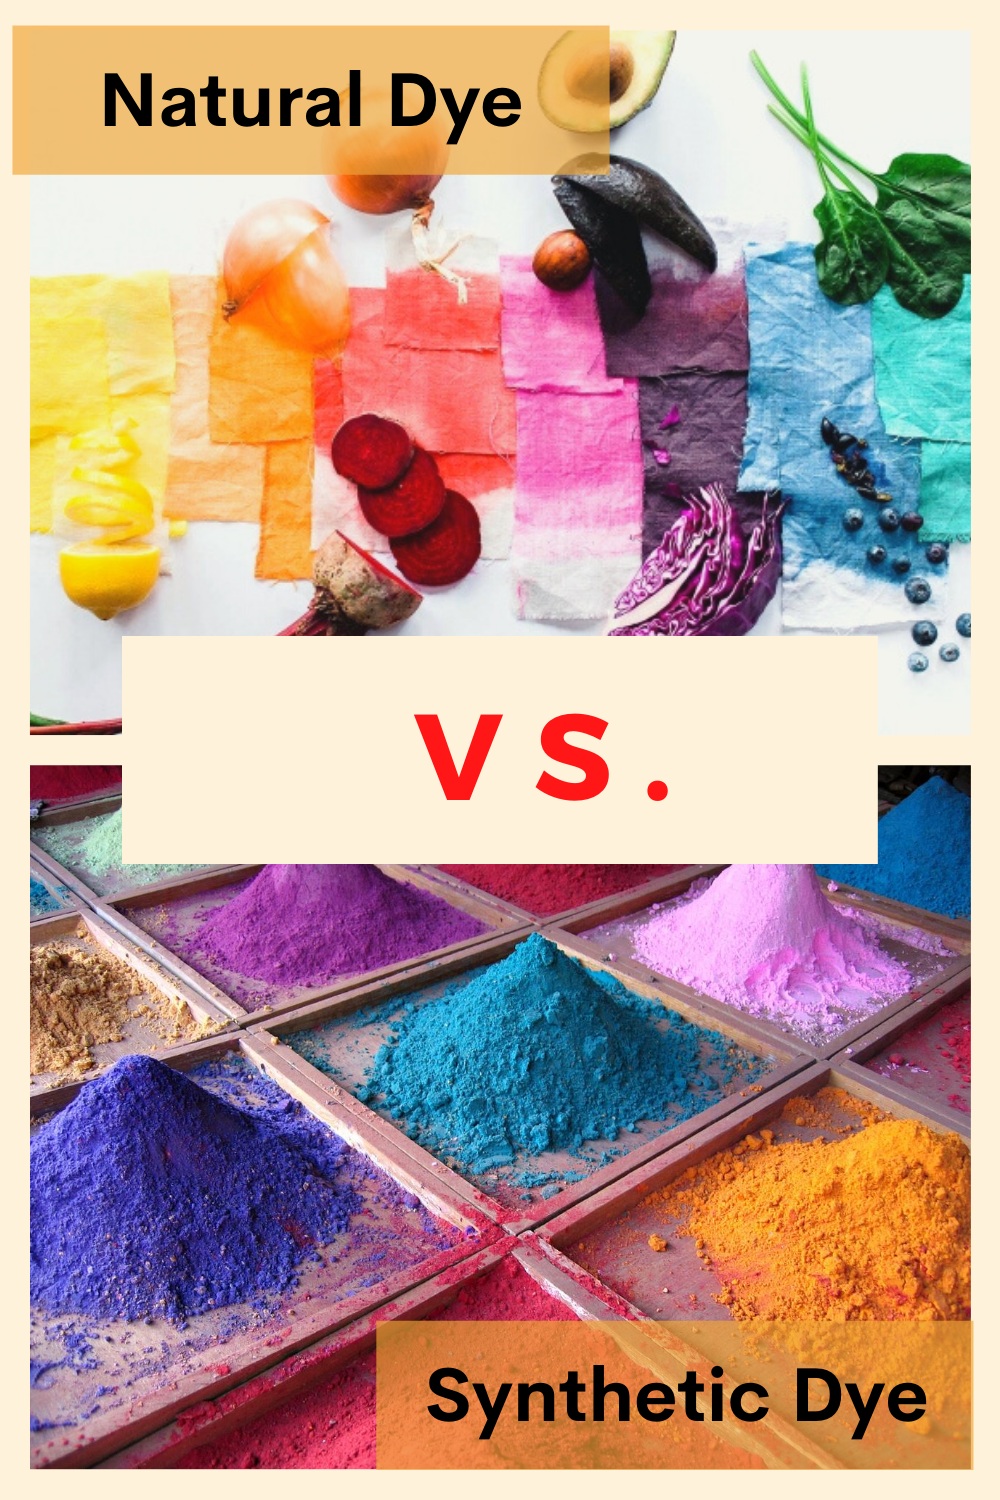 Natural dyes v synthetic: which is more sustainable?